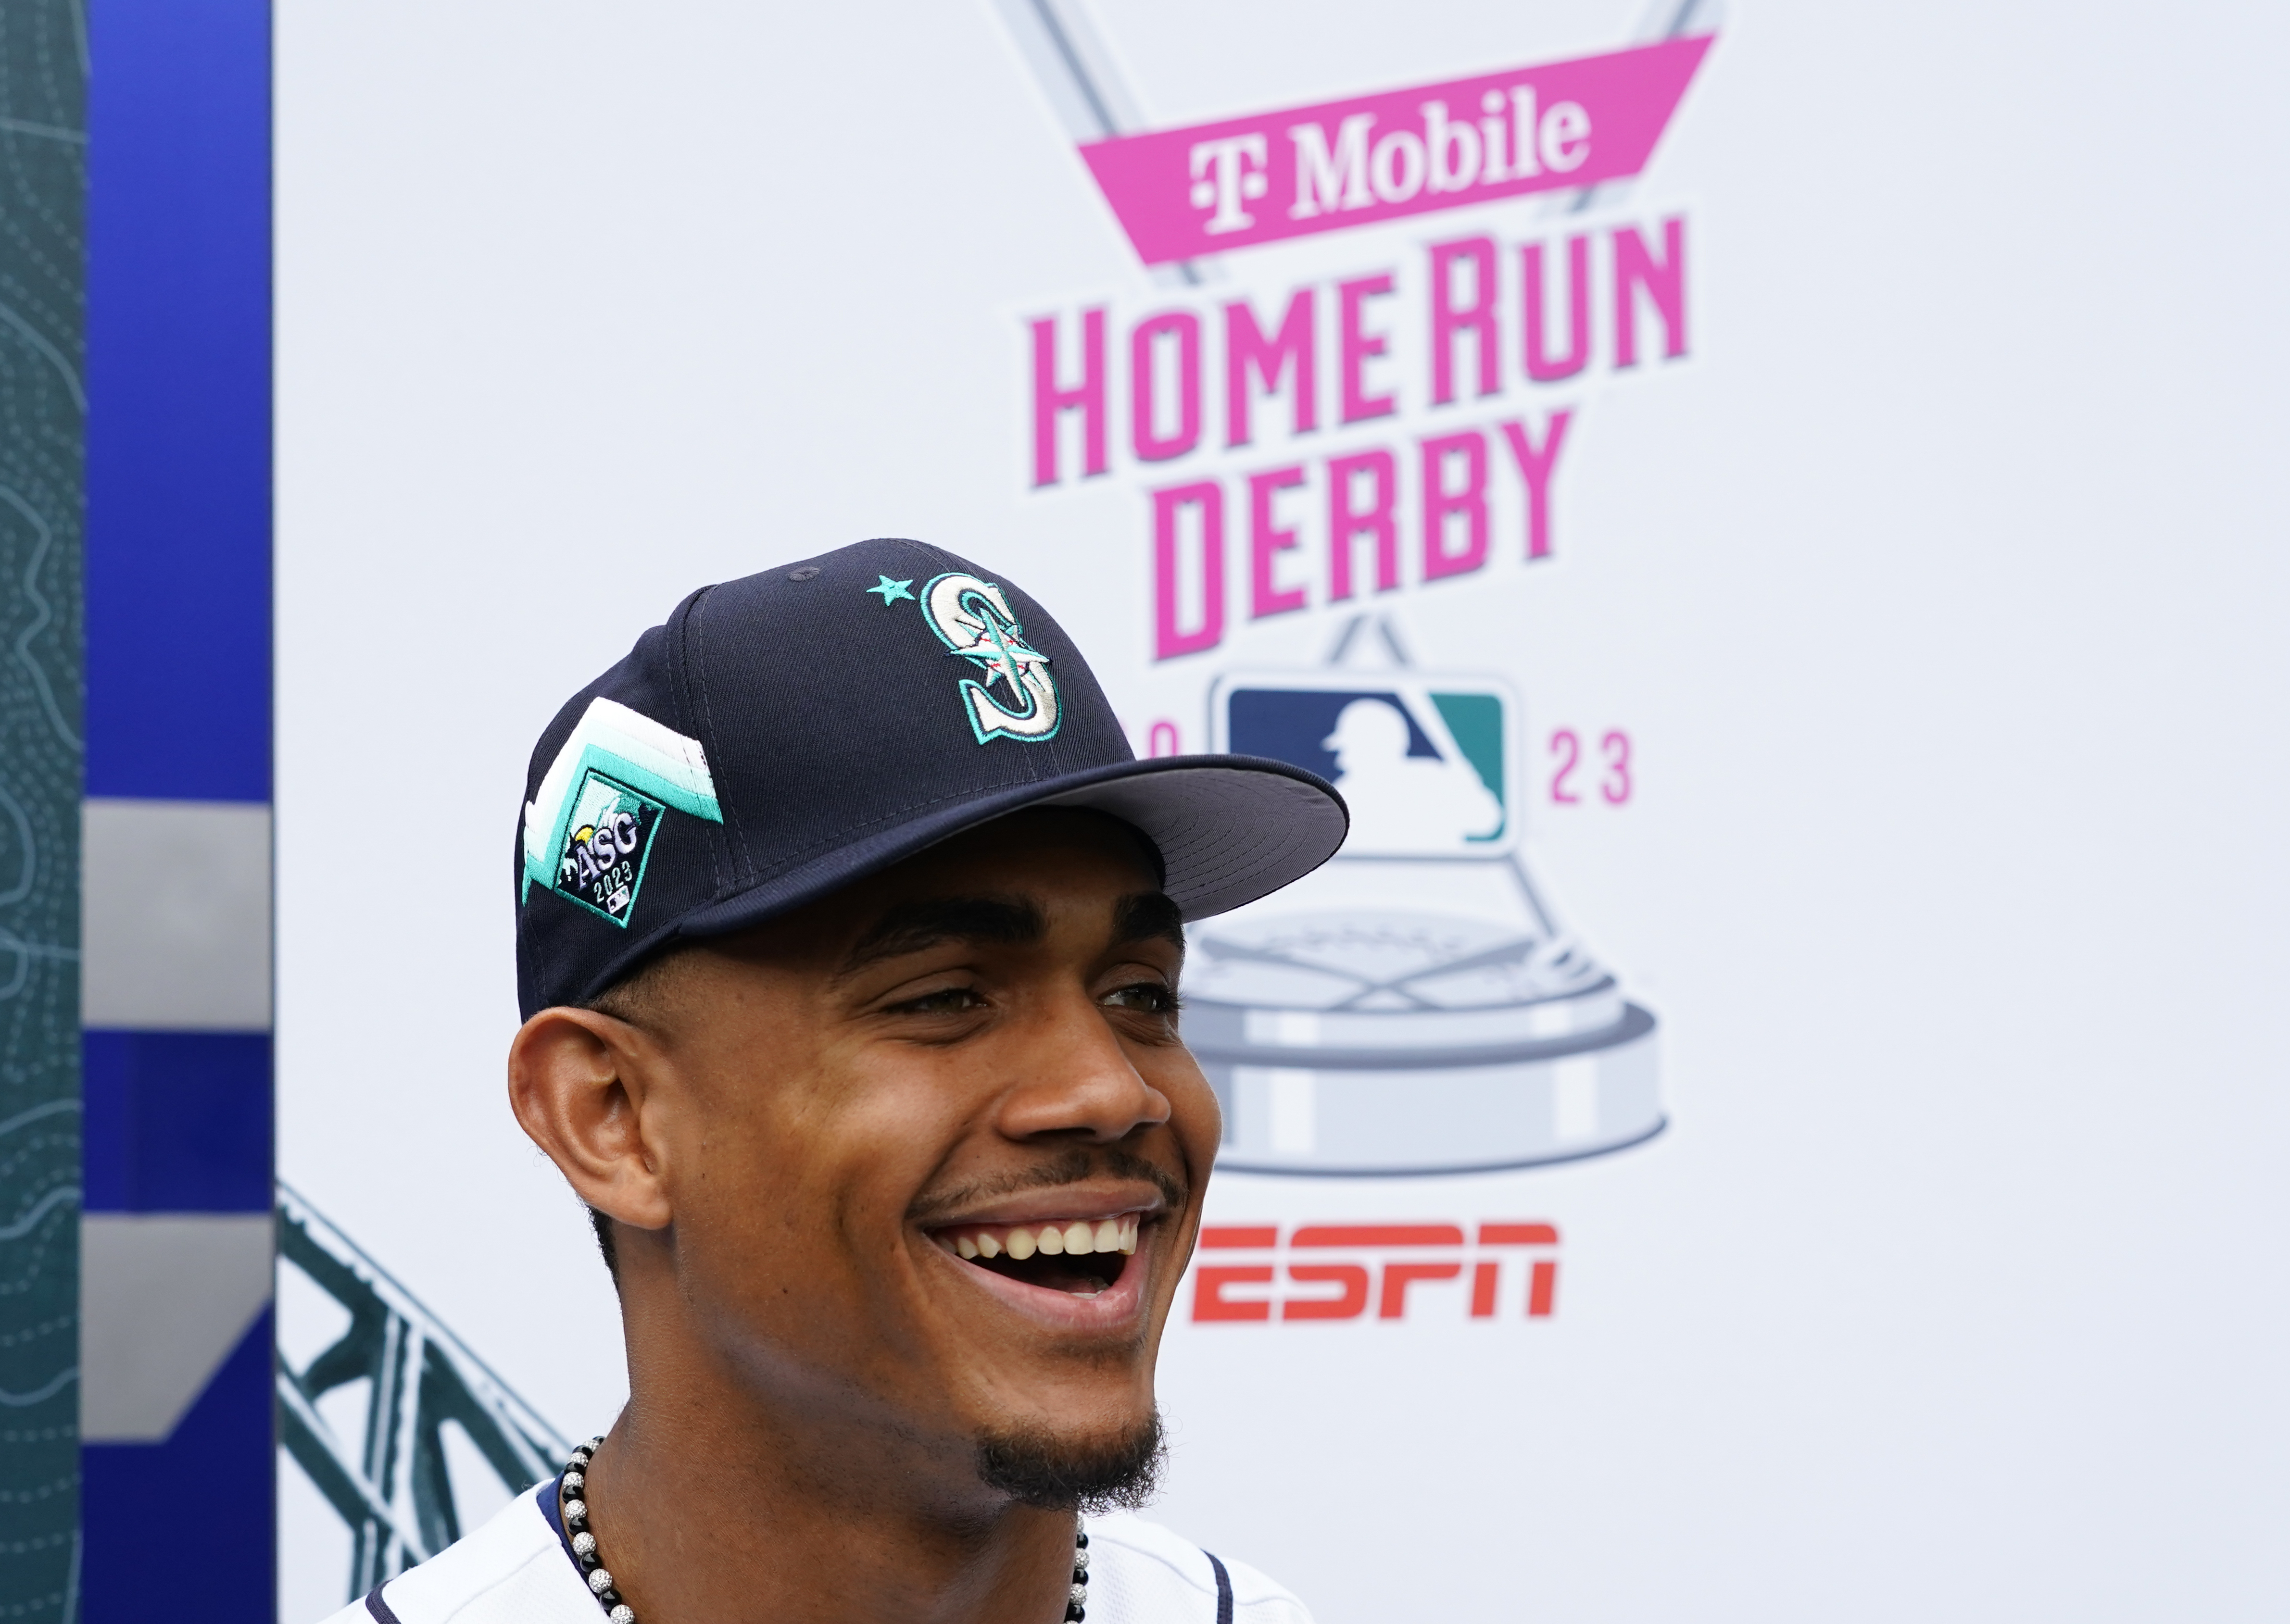 2023 MLB All-Star Game - Best looks from the red carpet in Seattle - ESPN